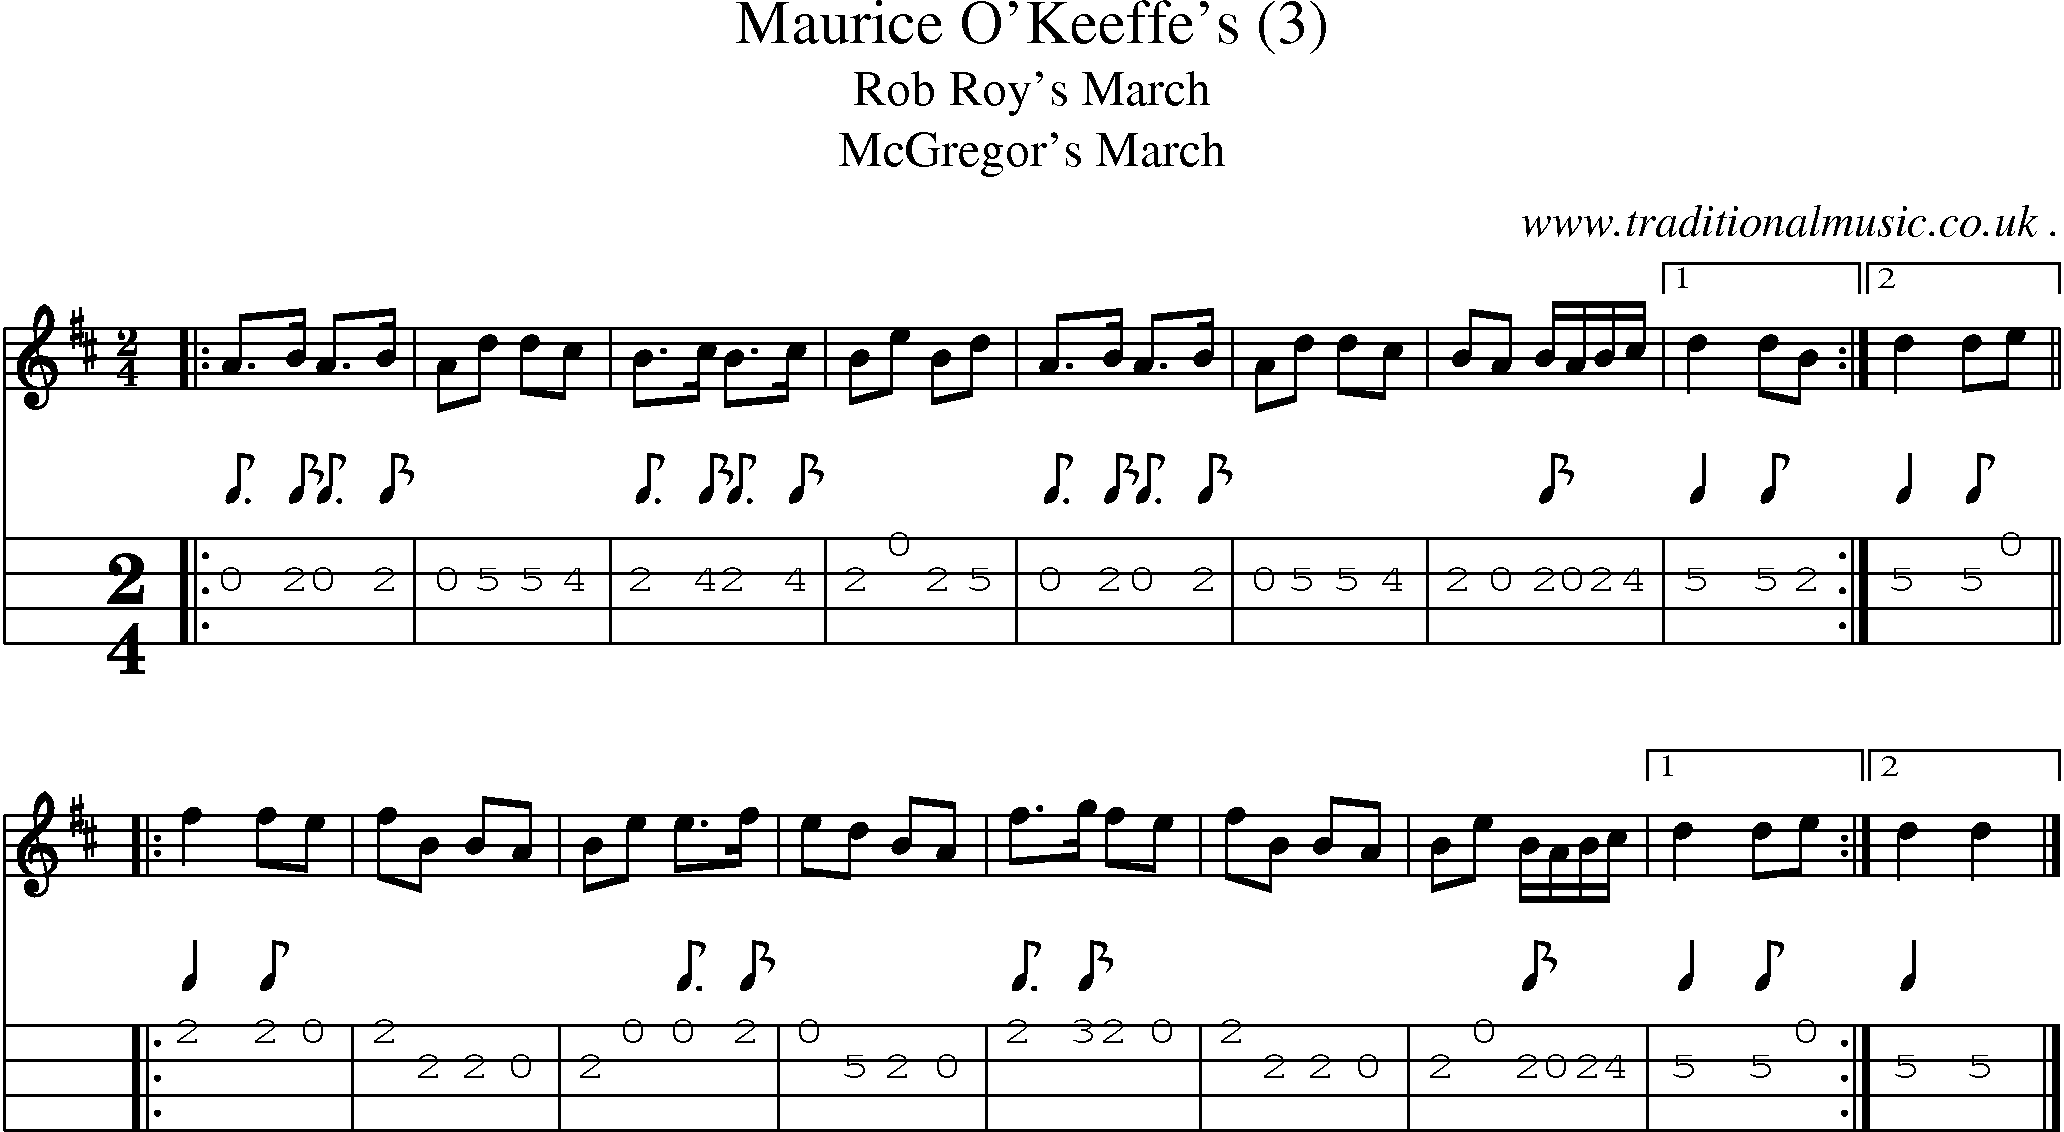 Sheet-music  score, Chords and Mandolin Tabs for Maurice Okeeffes 3